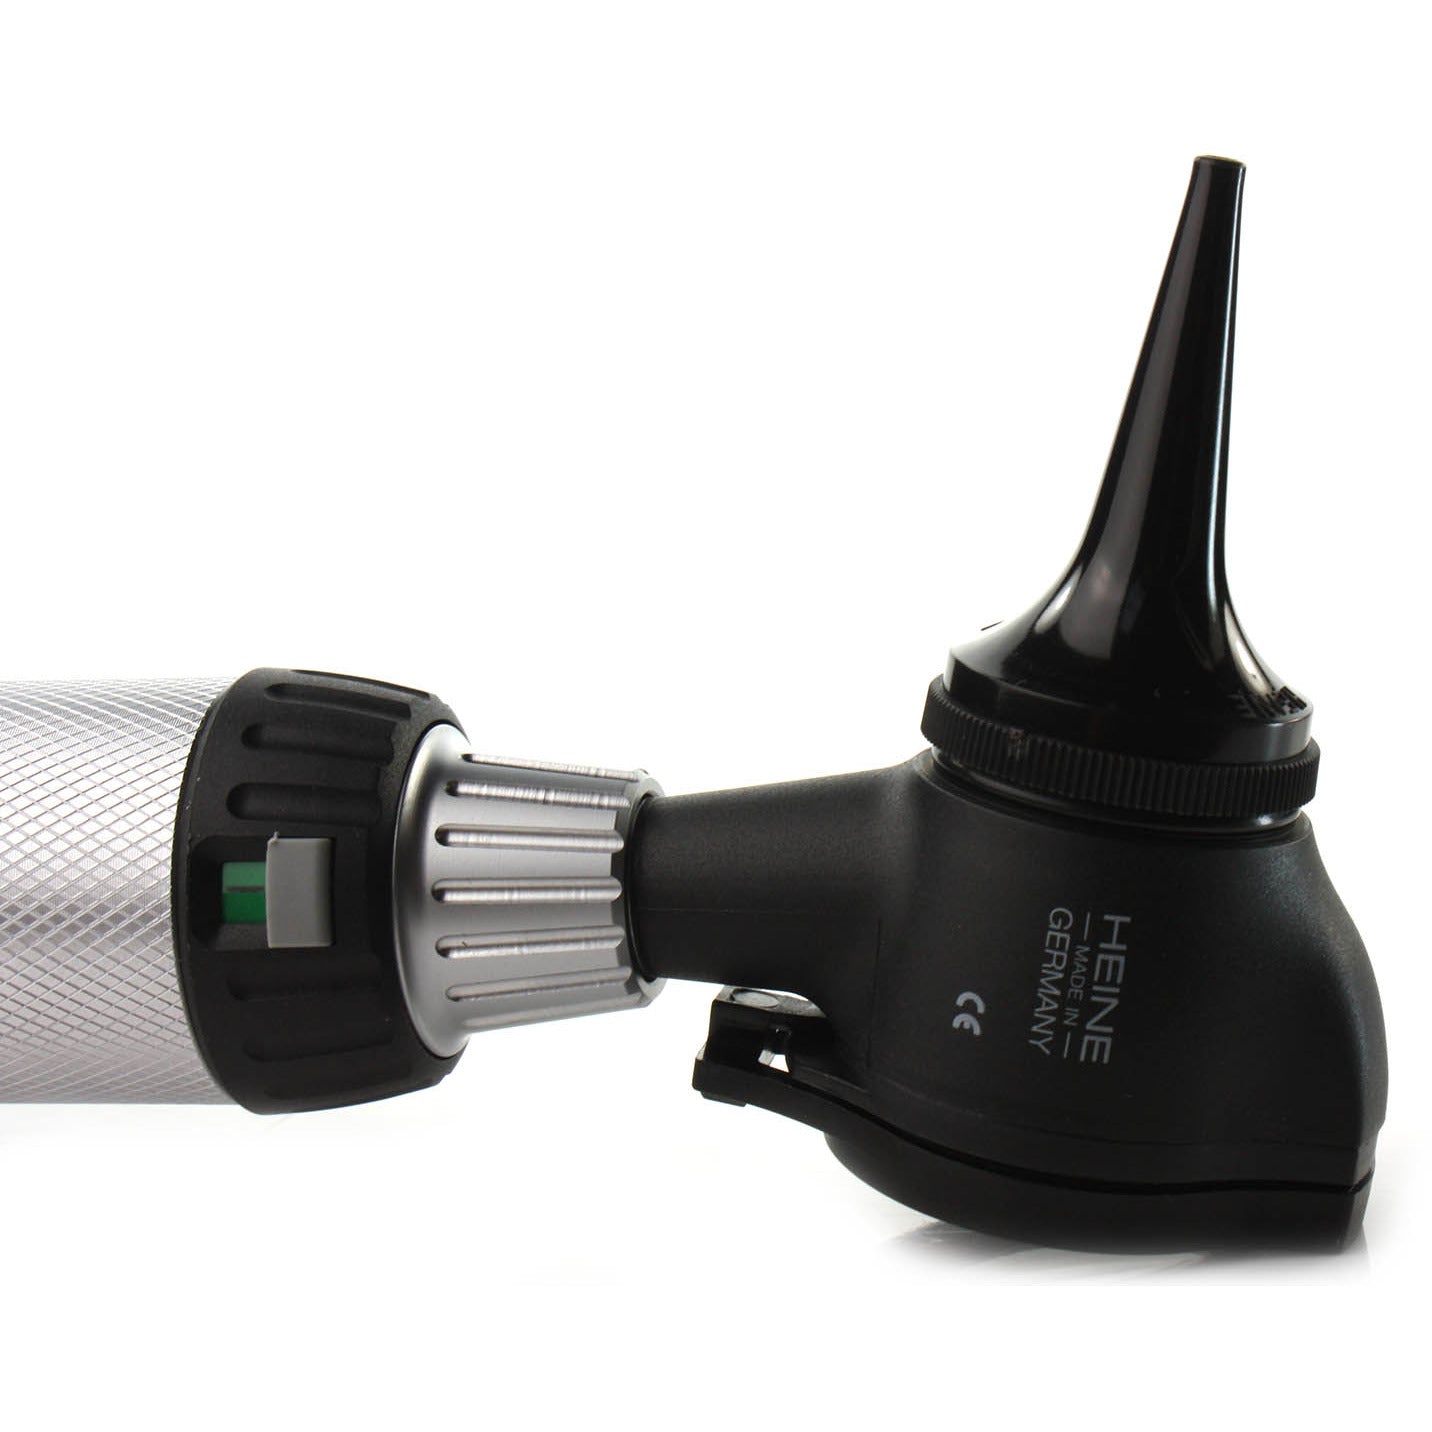 HEINE K100 ENT Otoscope Set with NiMH Handle & NT300 Charger - with 3 Specula